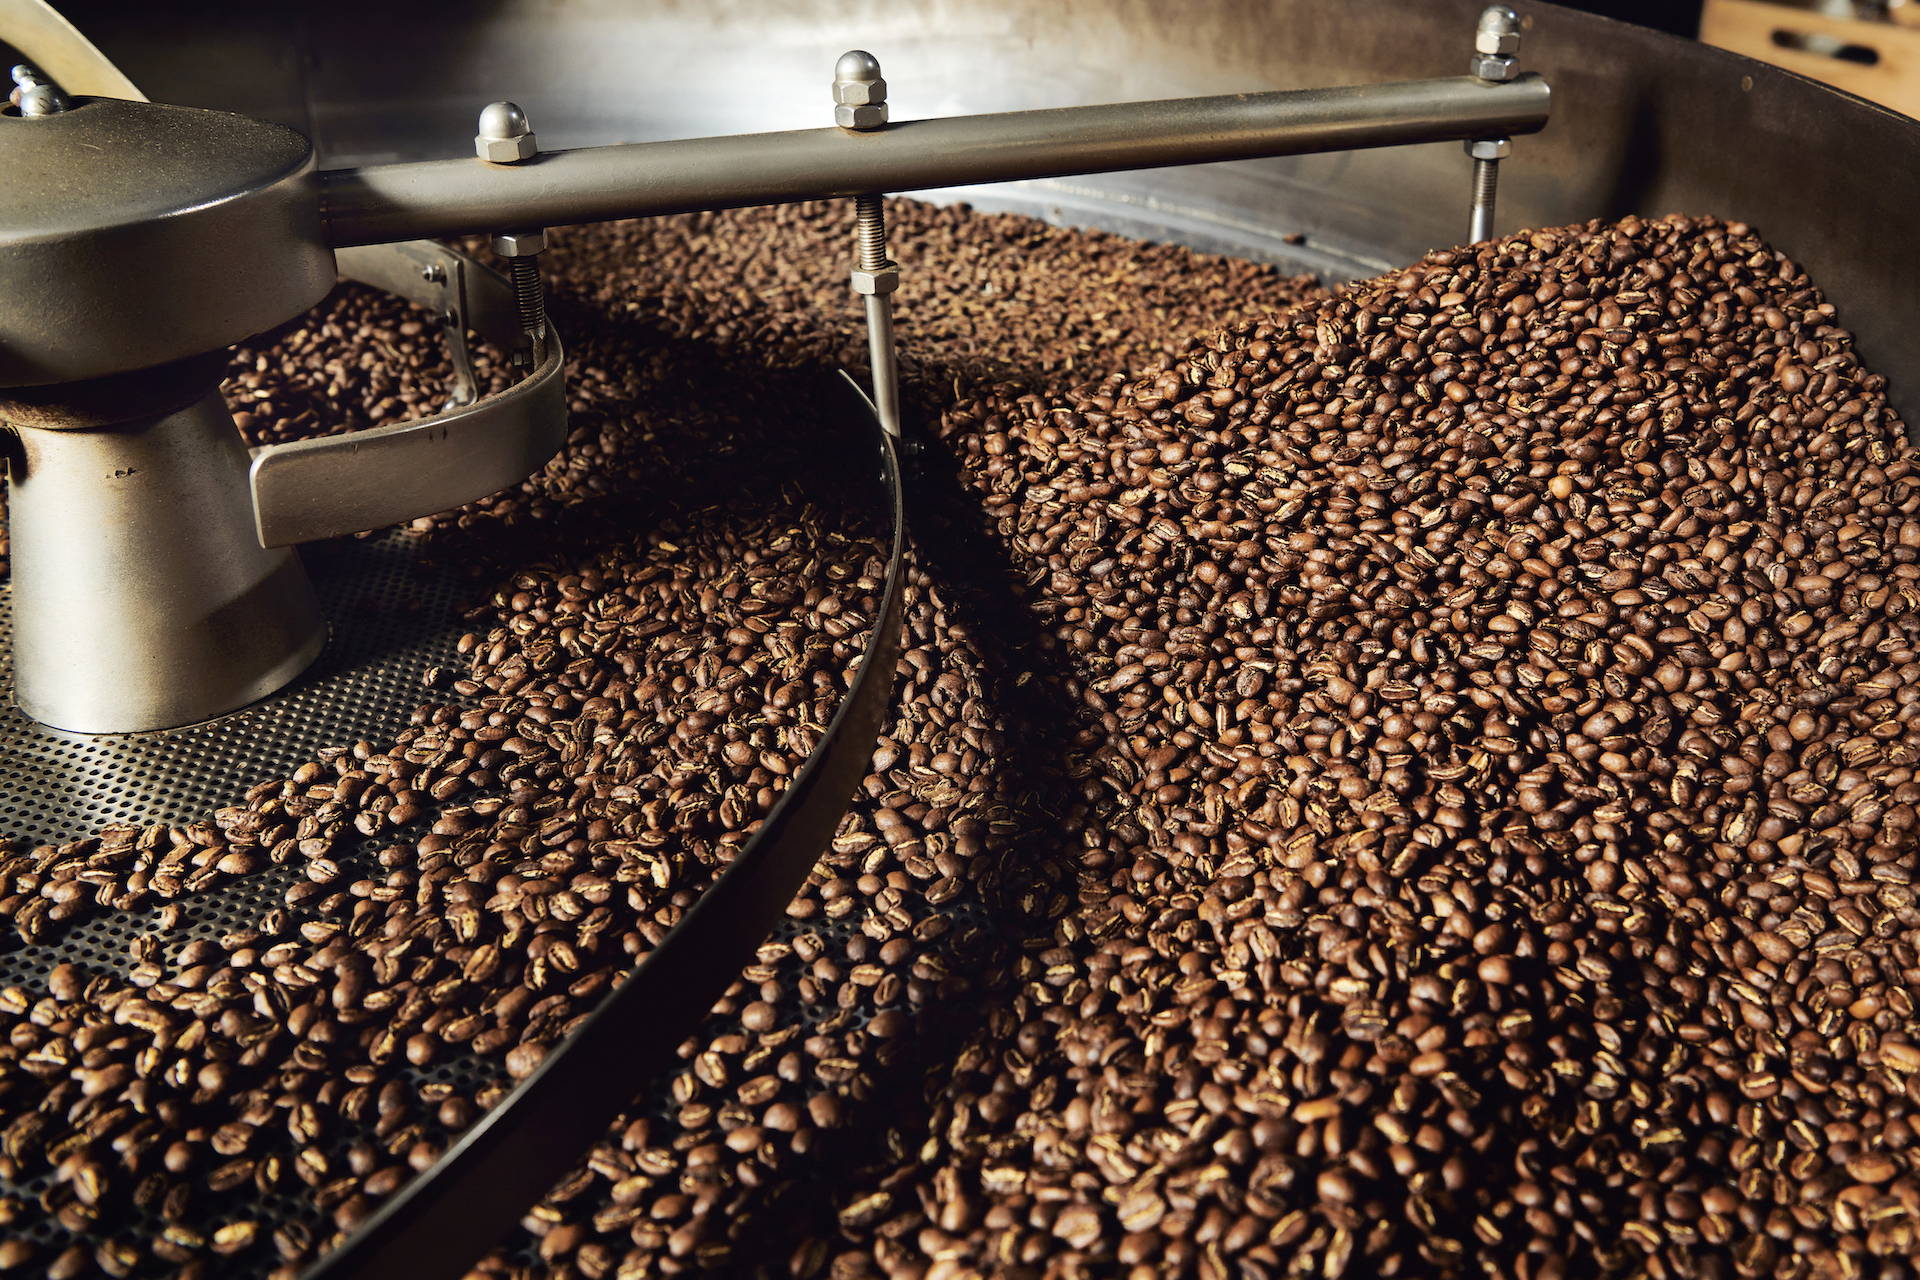 Large amount of coffee beans spinning around in a roaster